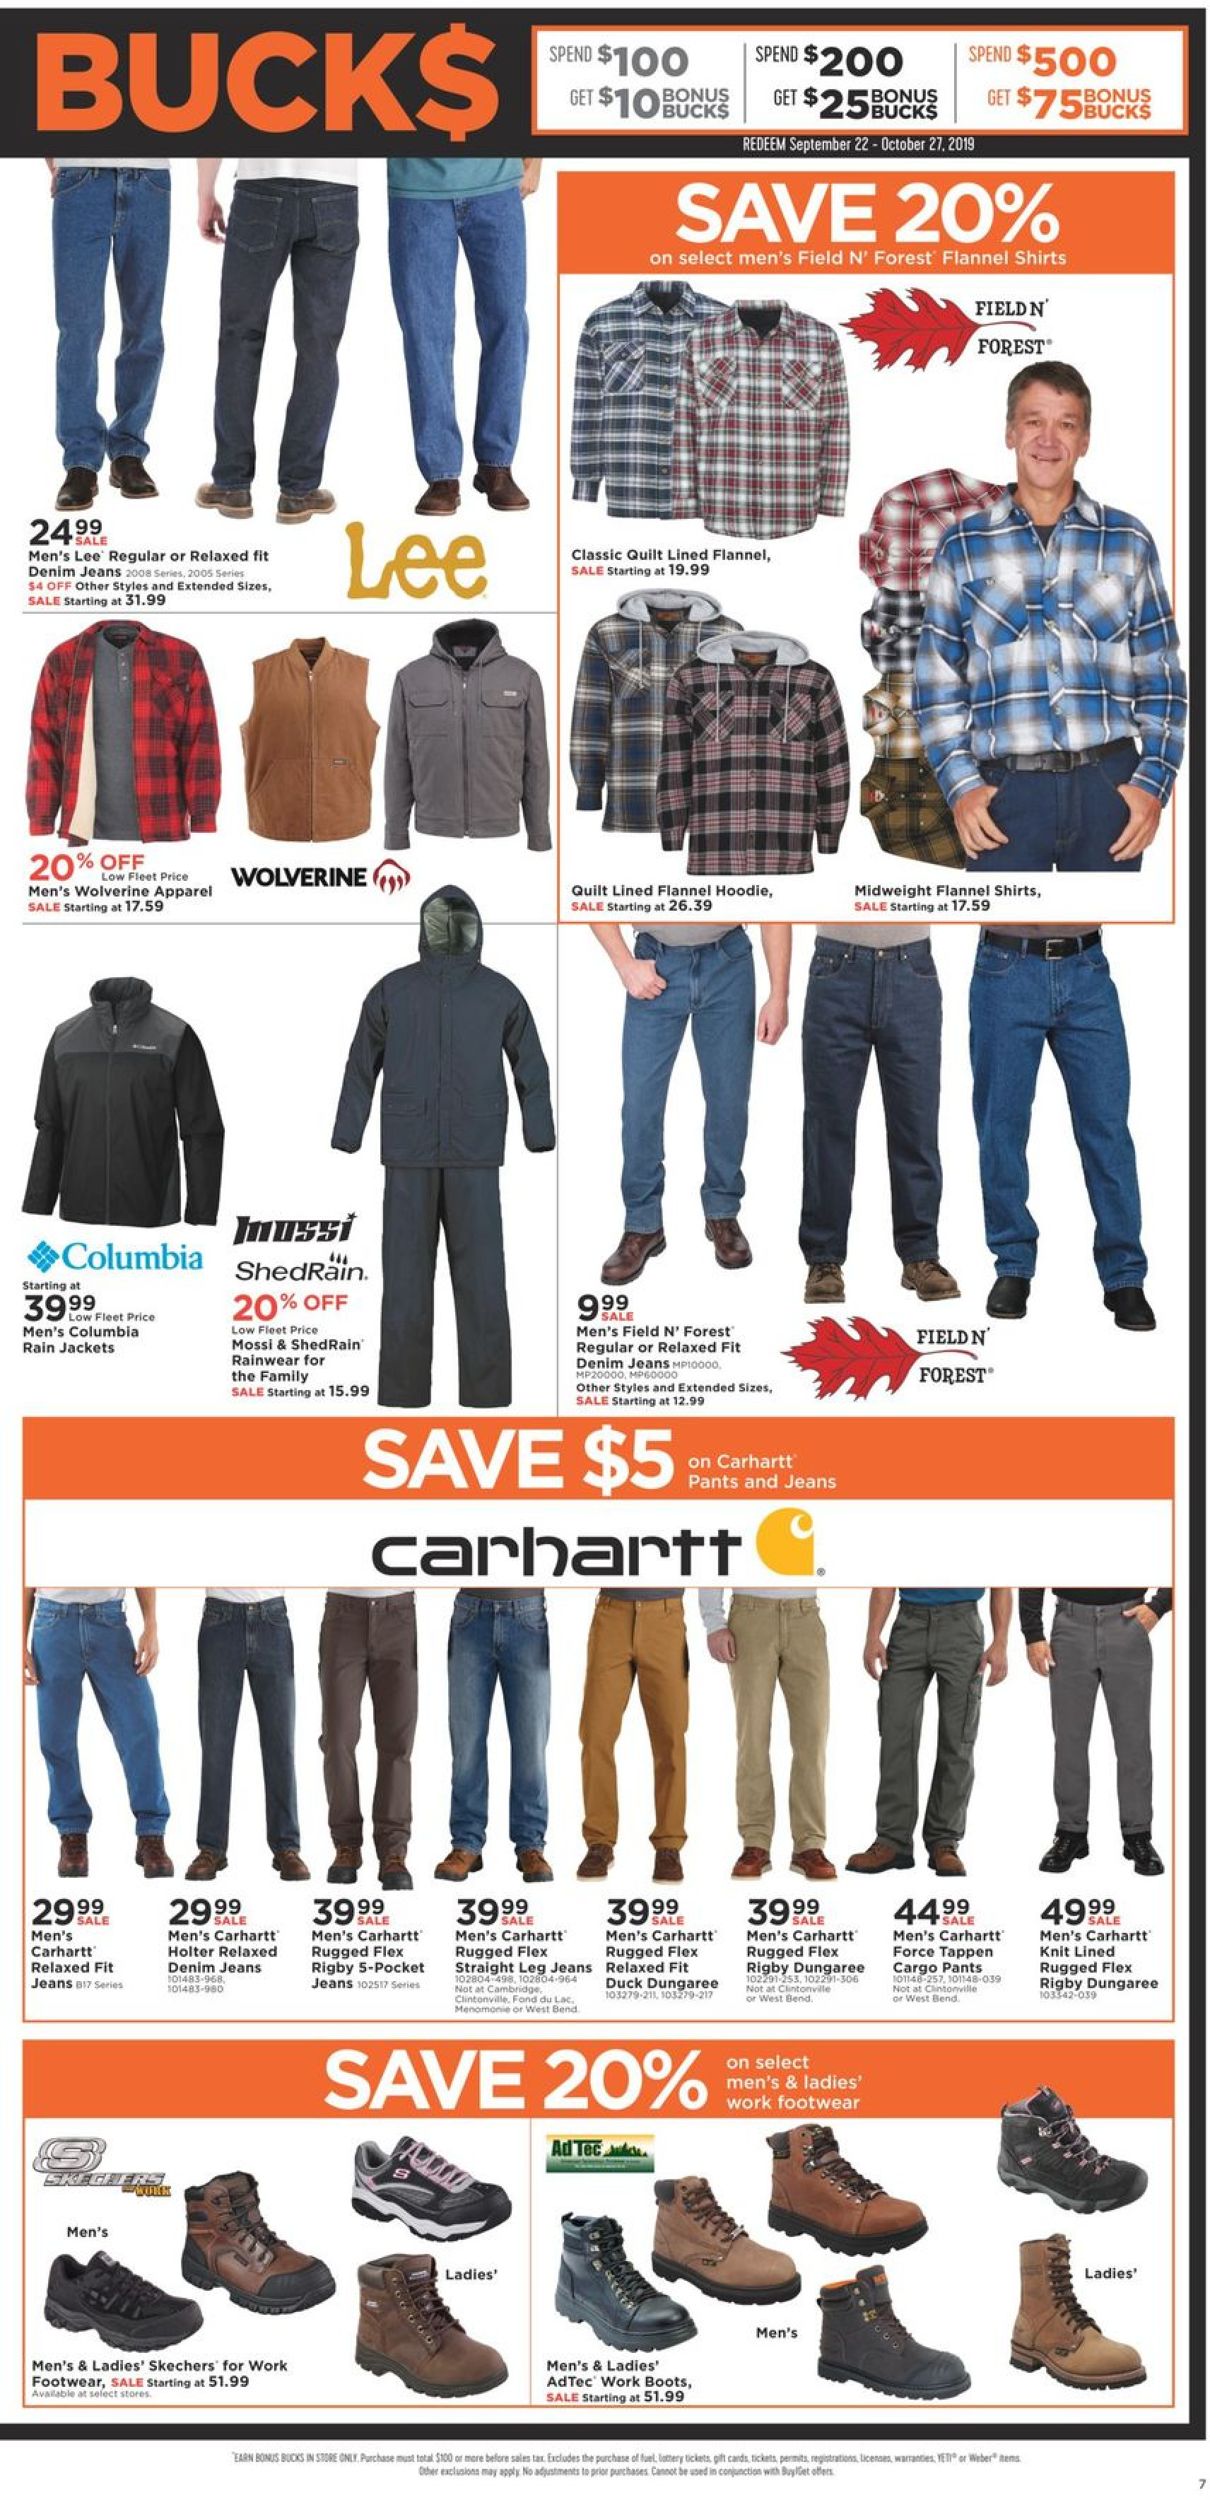 Mills Fleet Farm Current weekly ad 09/13 - 09/21/2019 [3] - frequent ...